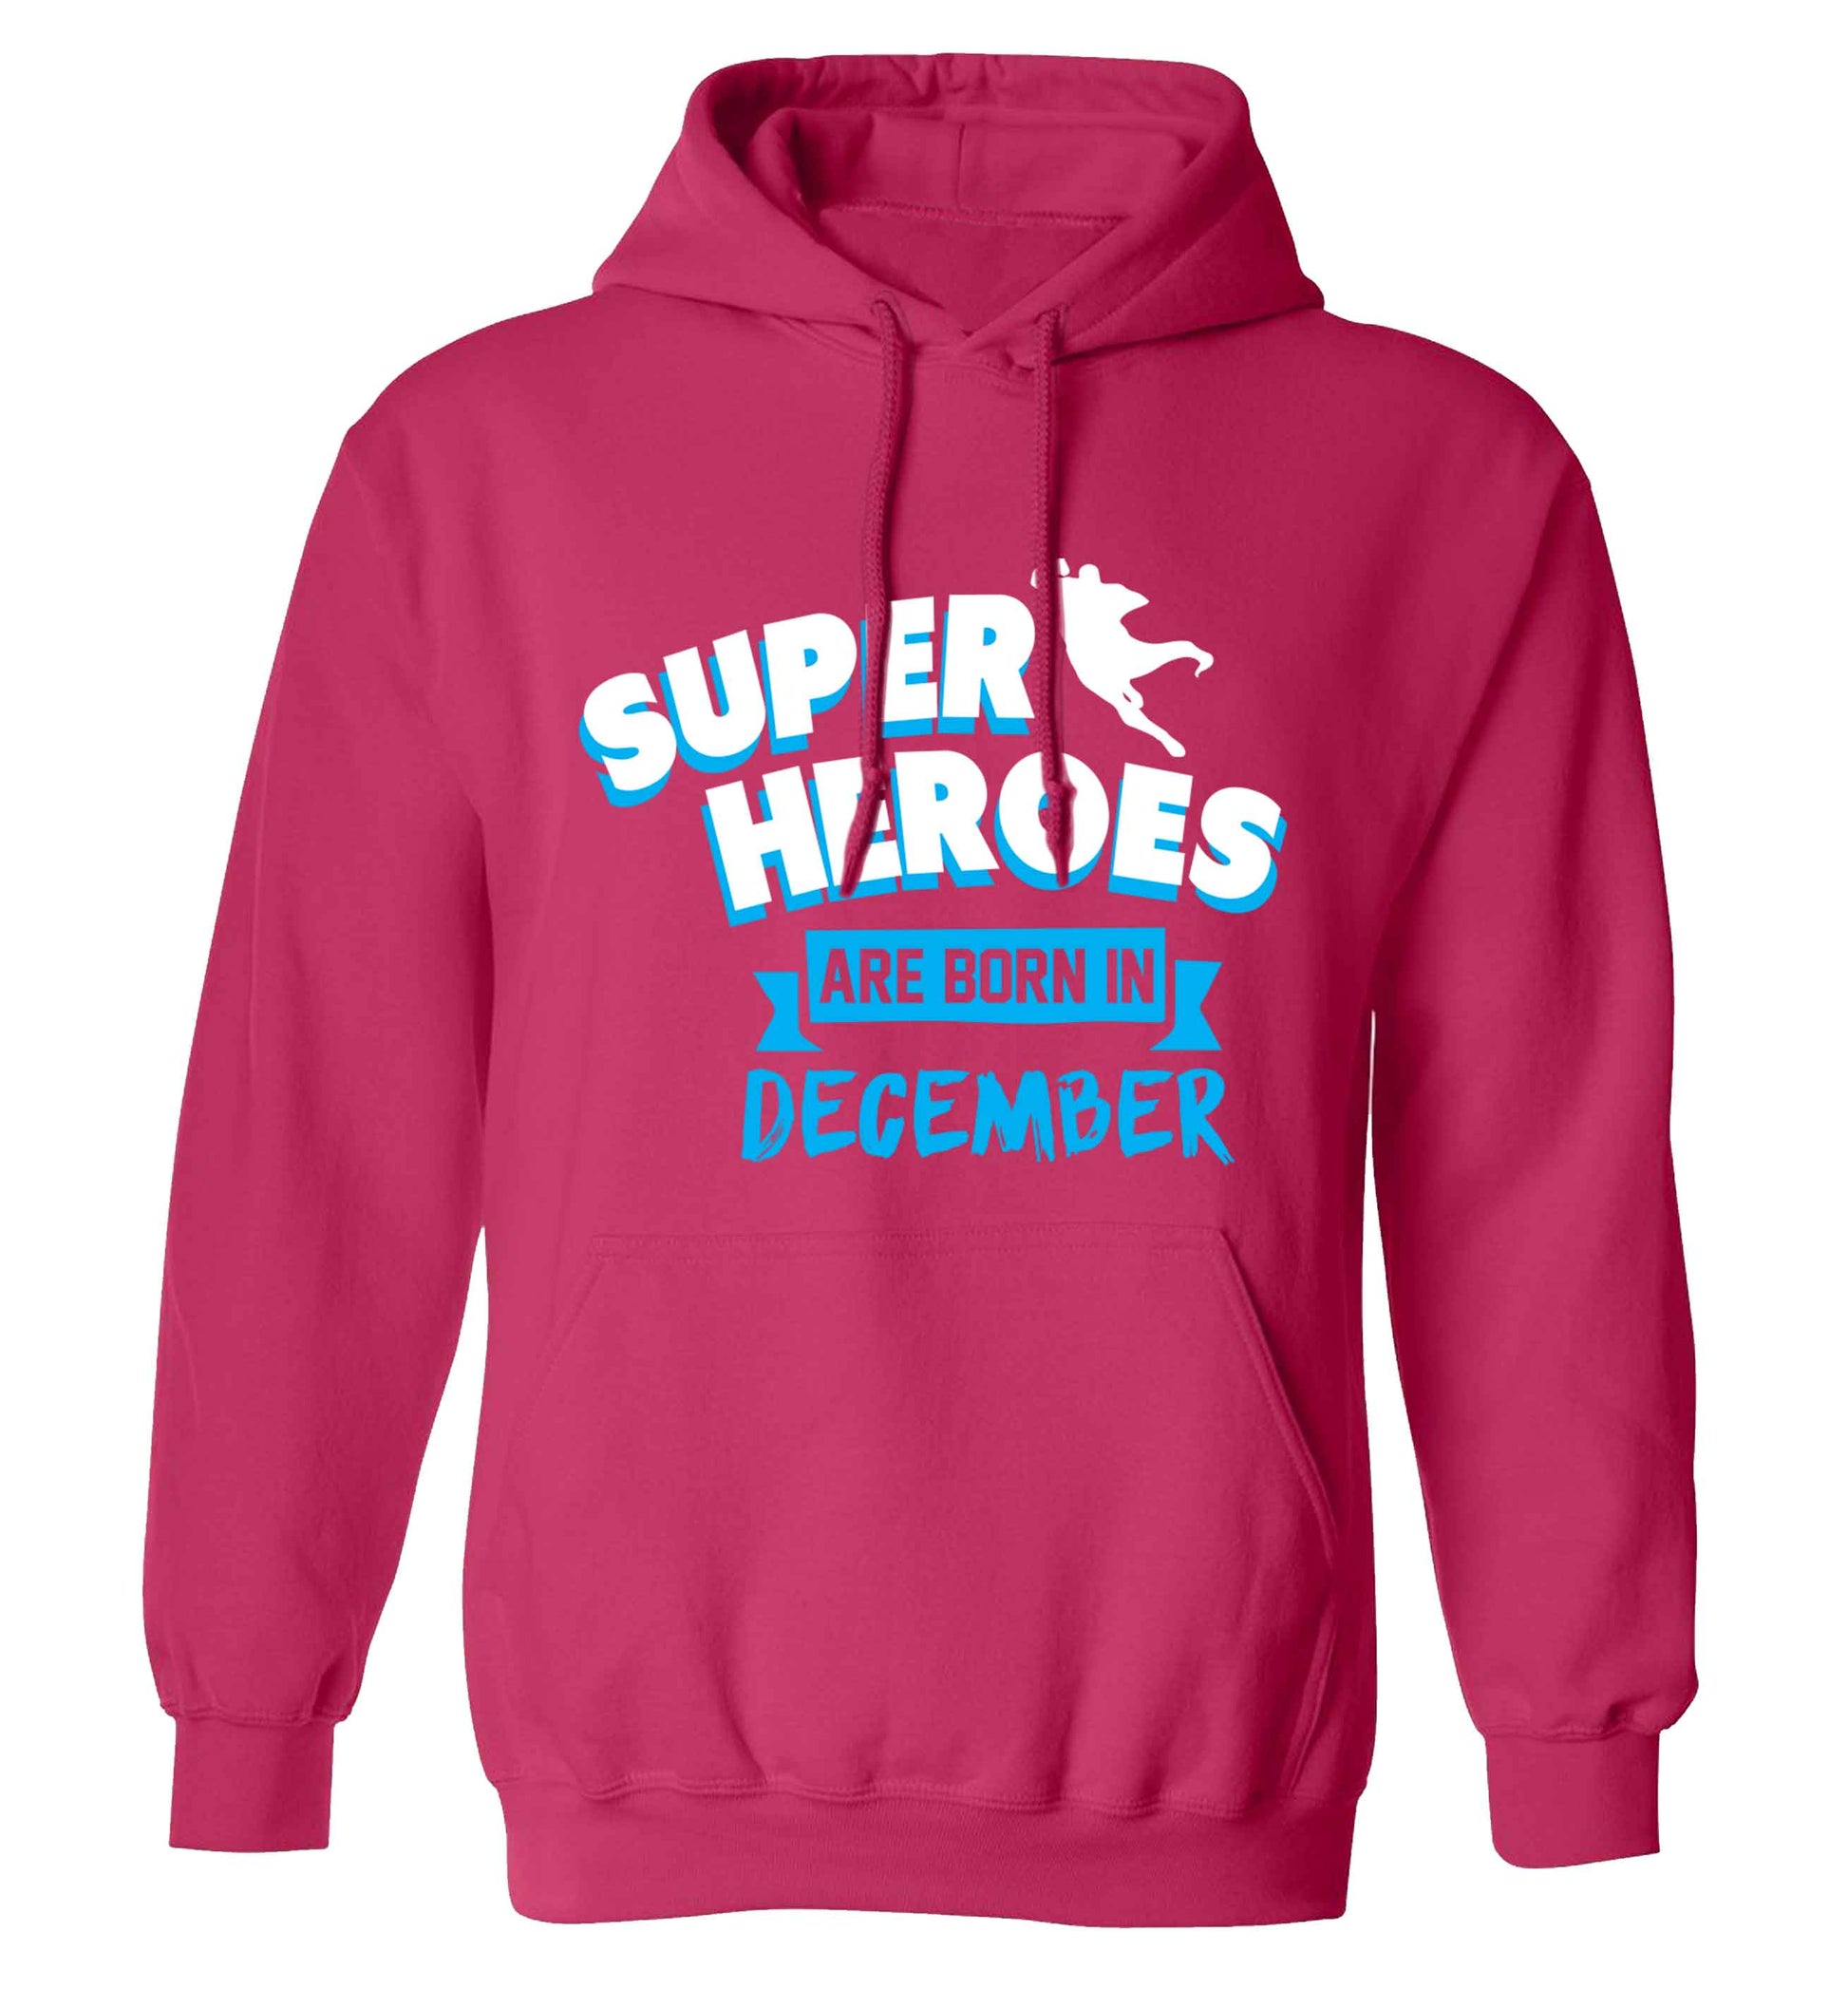 Superheroes are born in December adults unisex pink hoodie 2XL